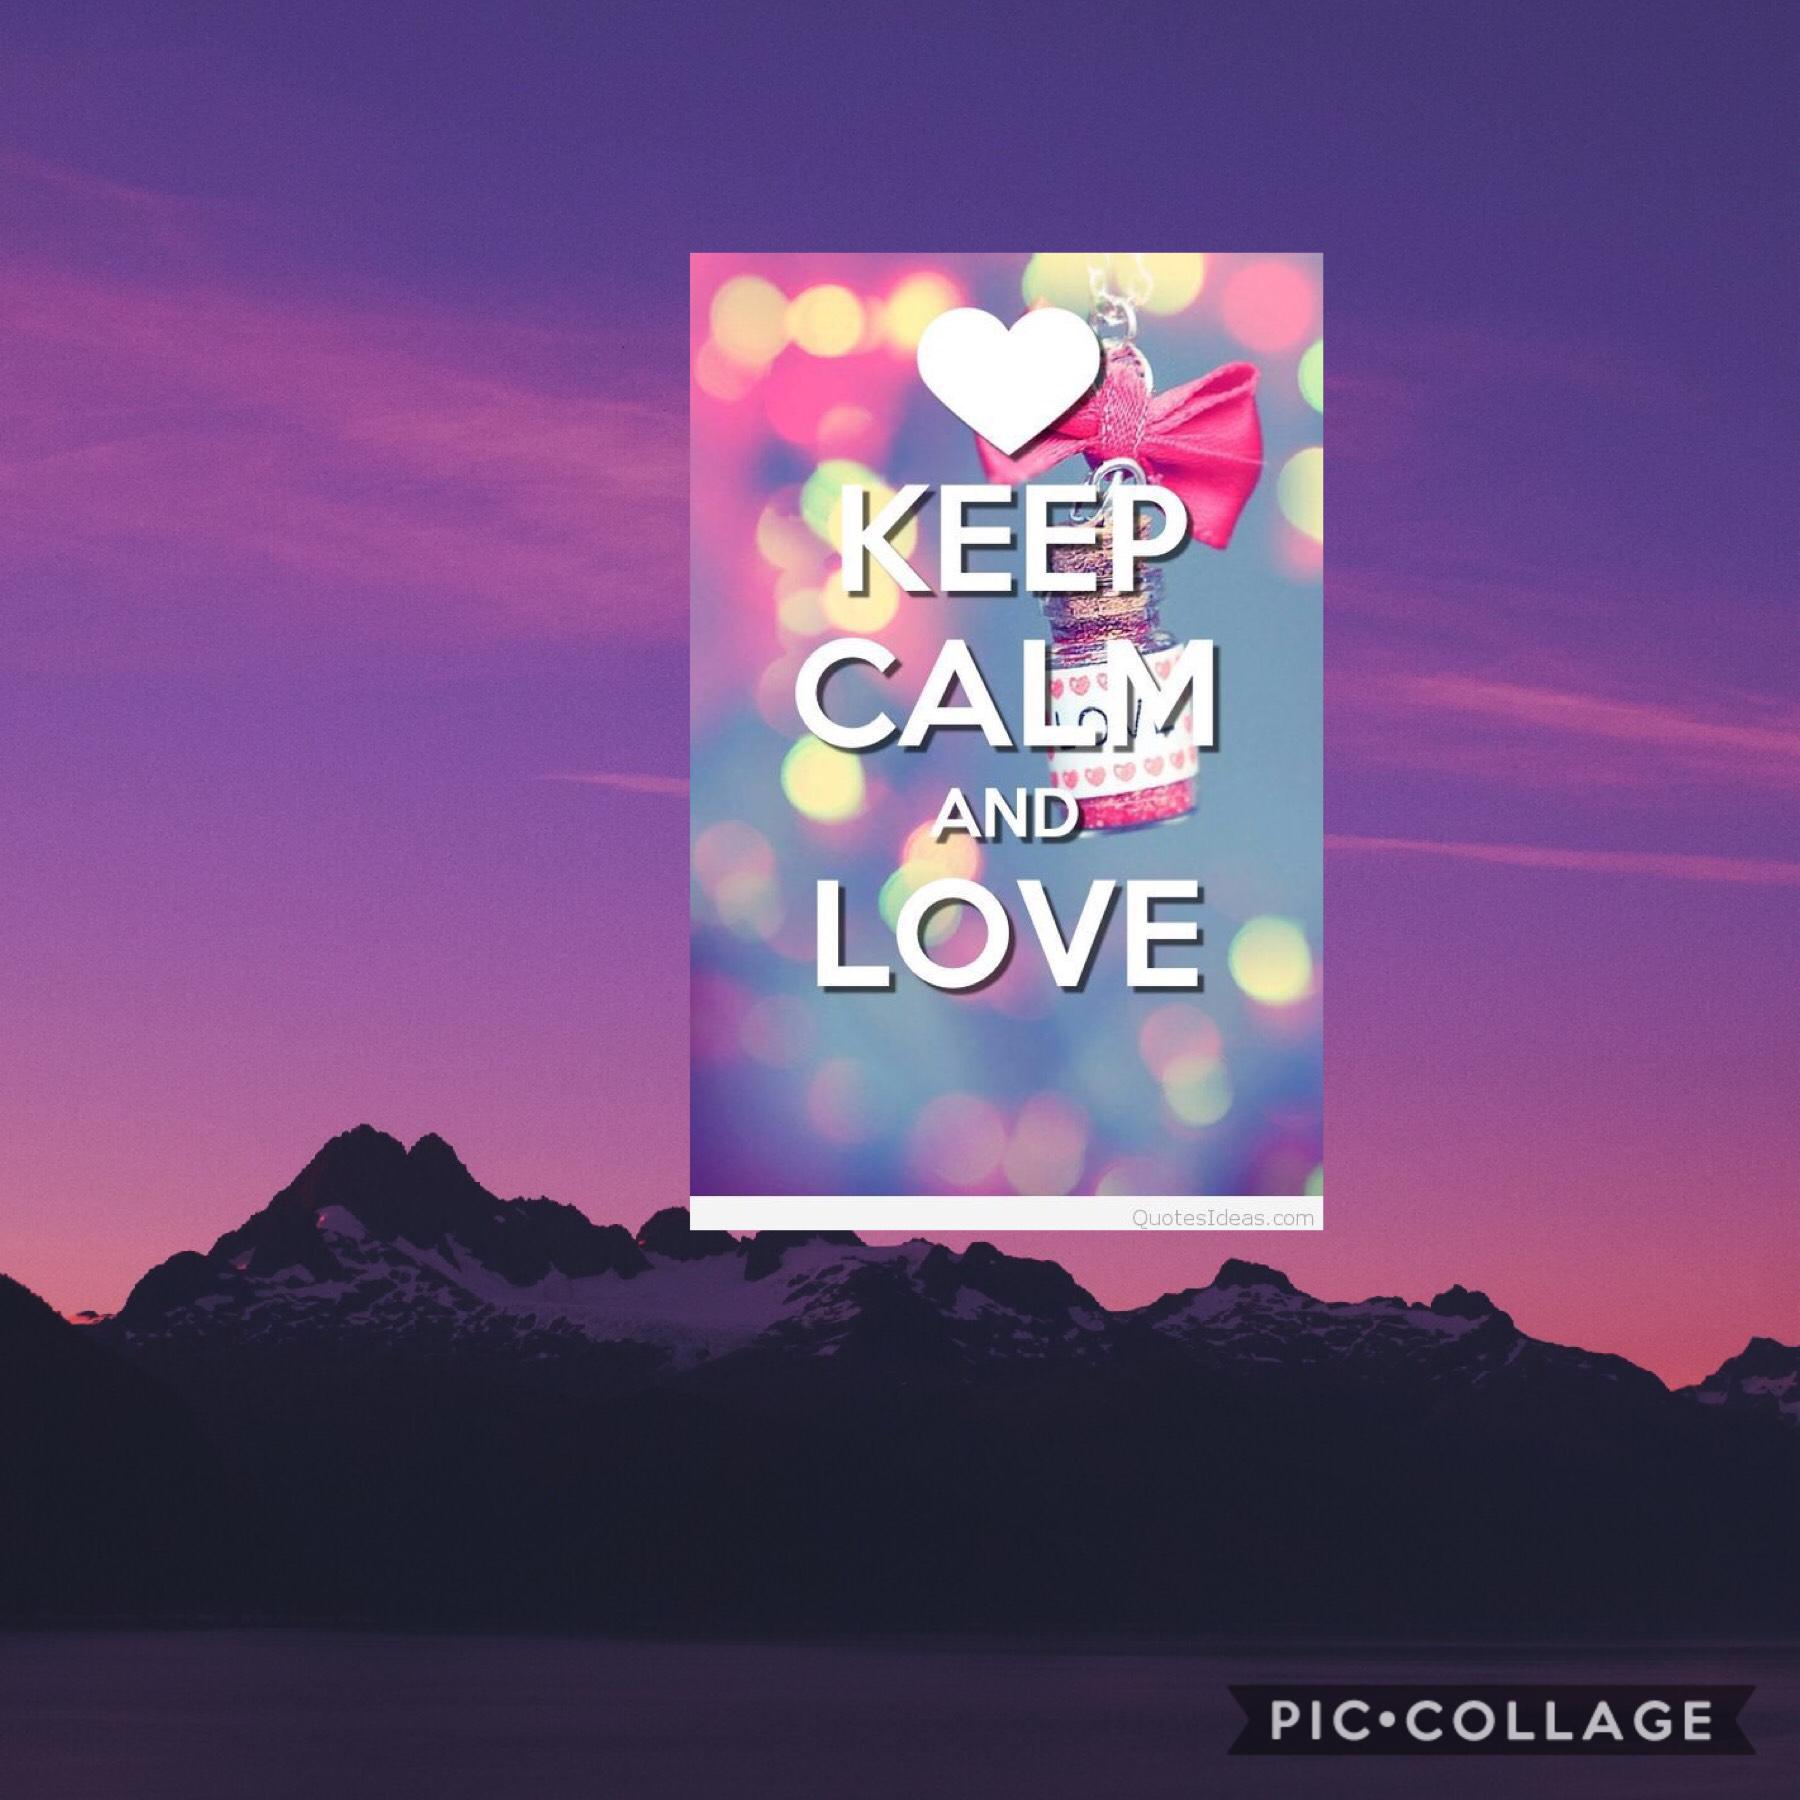 keep clam and love❤️